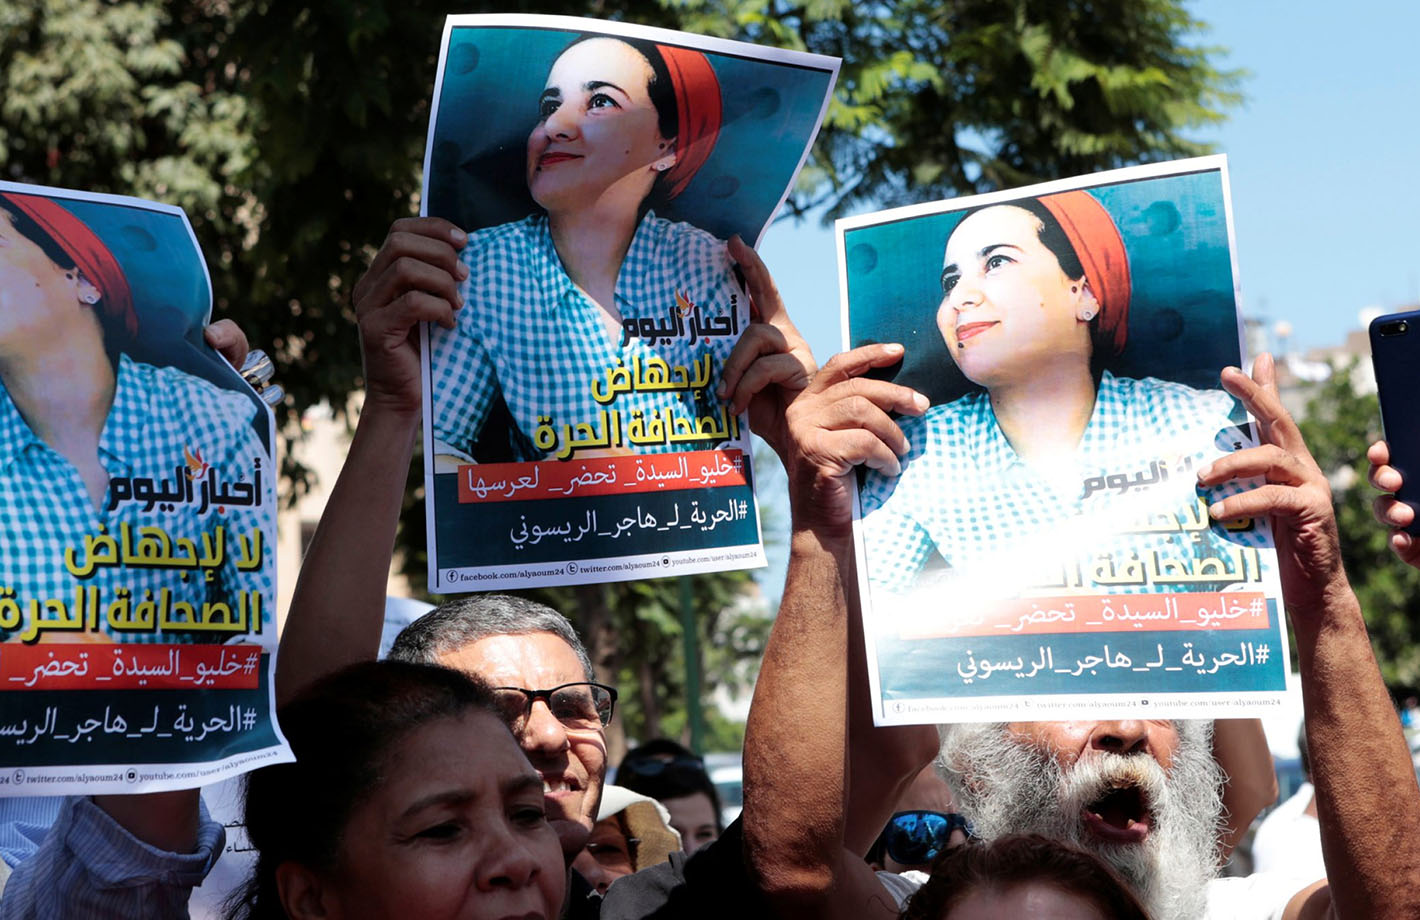 Protesters in Morocco hold posters demanding the freedom of journalist Hajar Raissouni